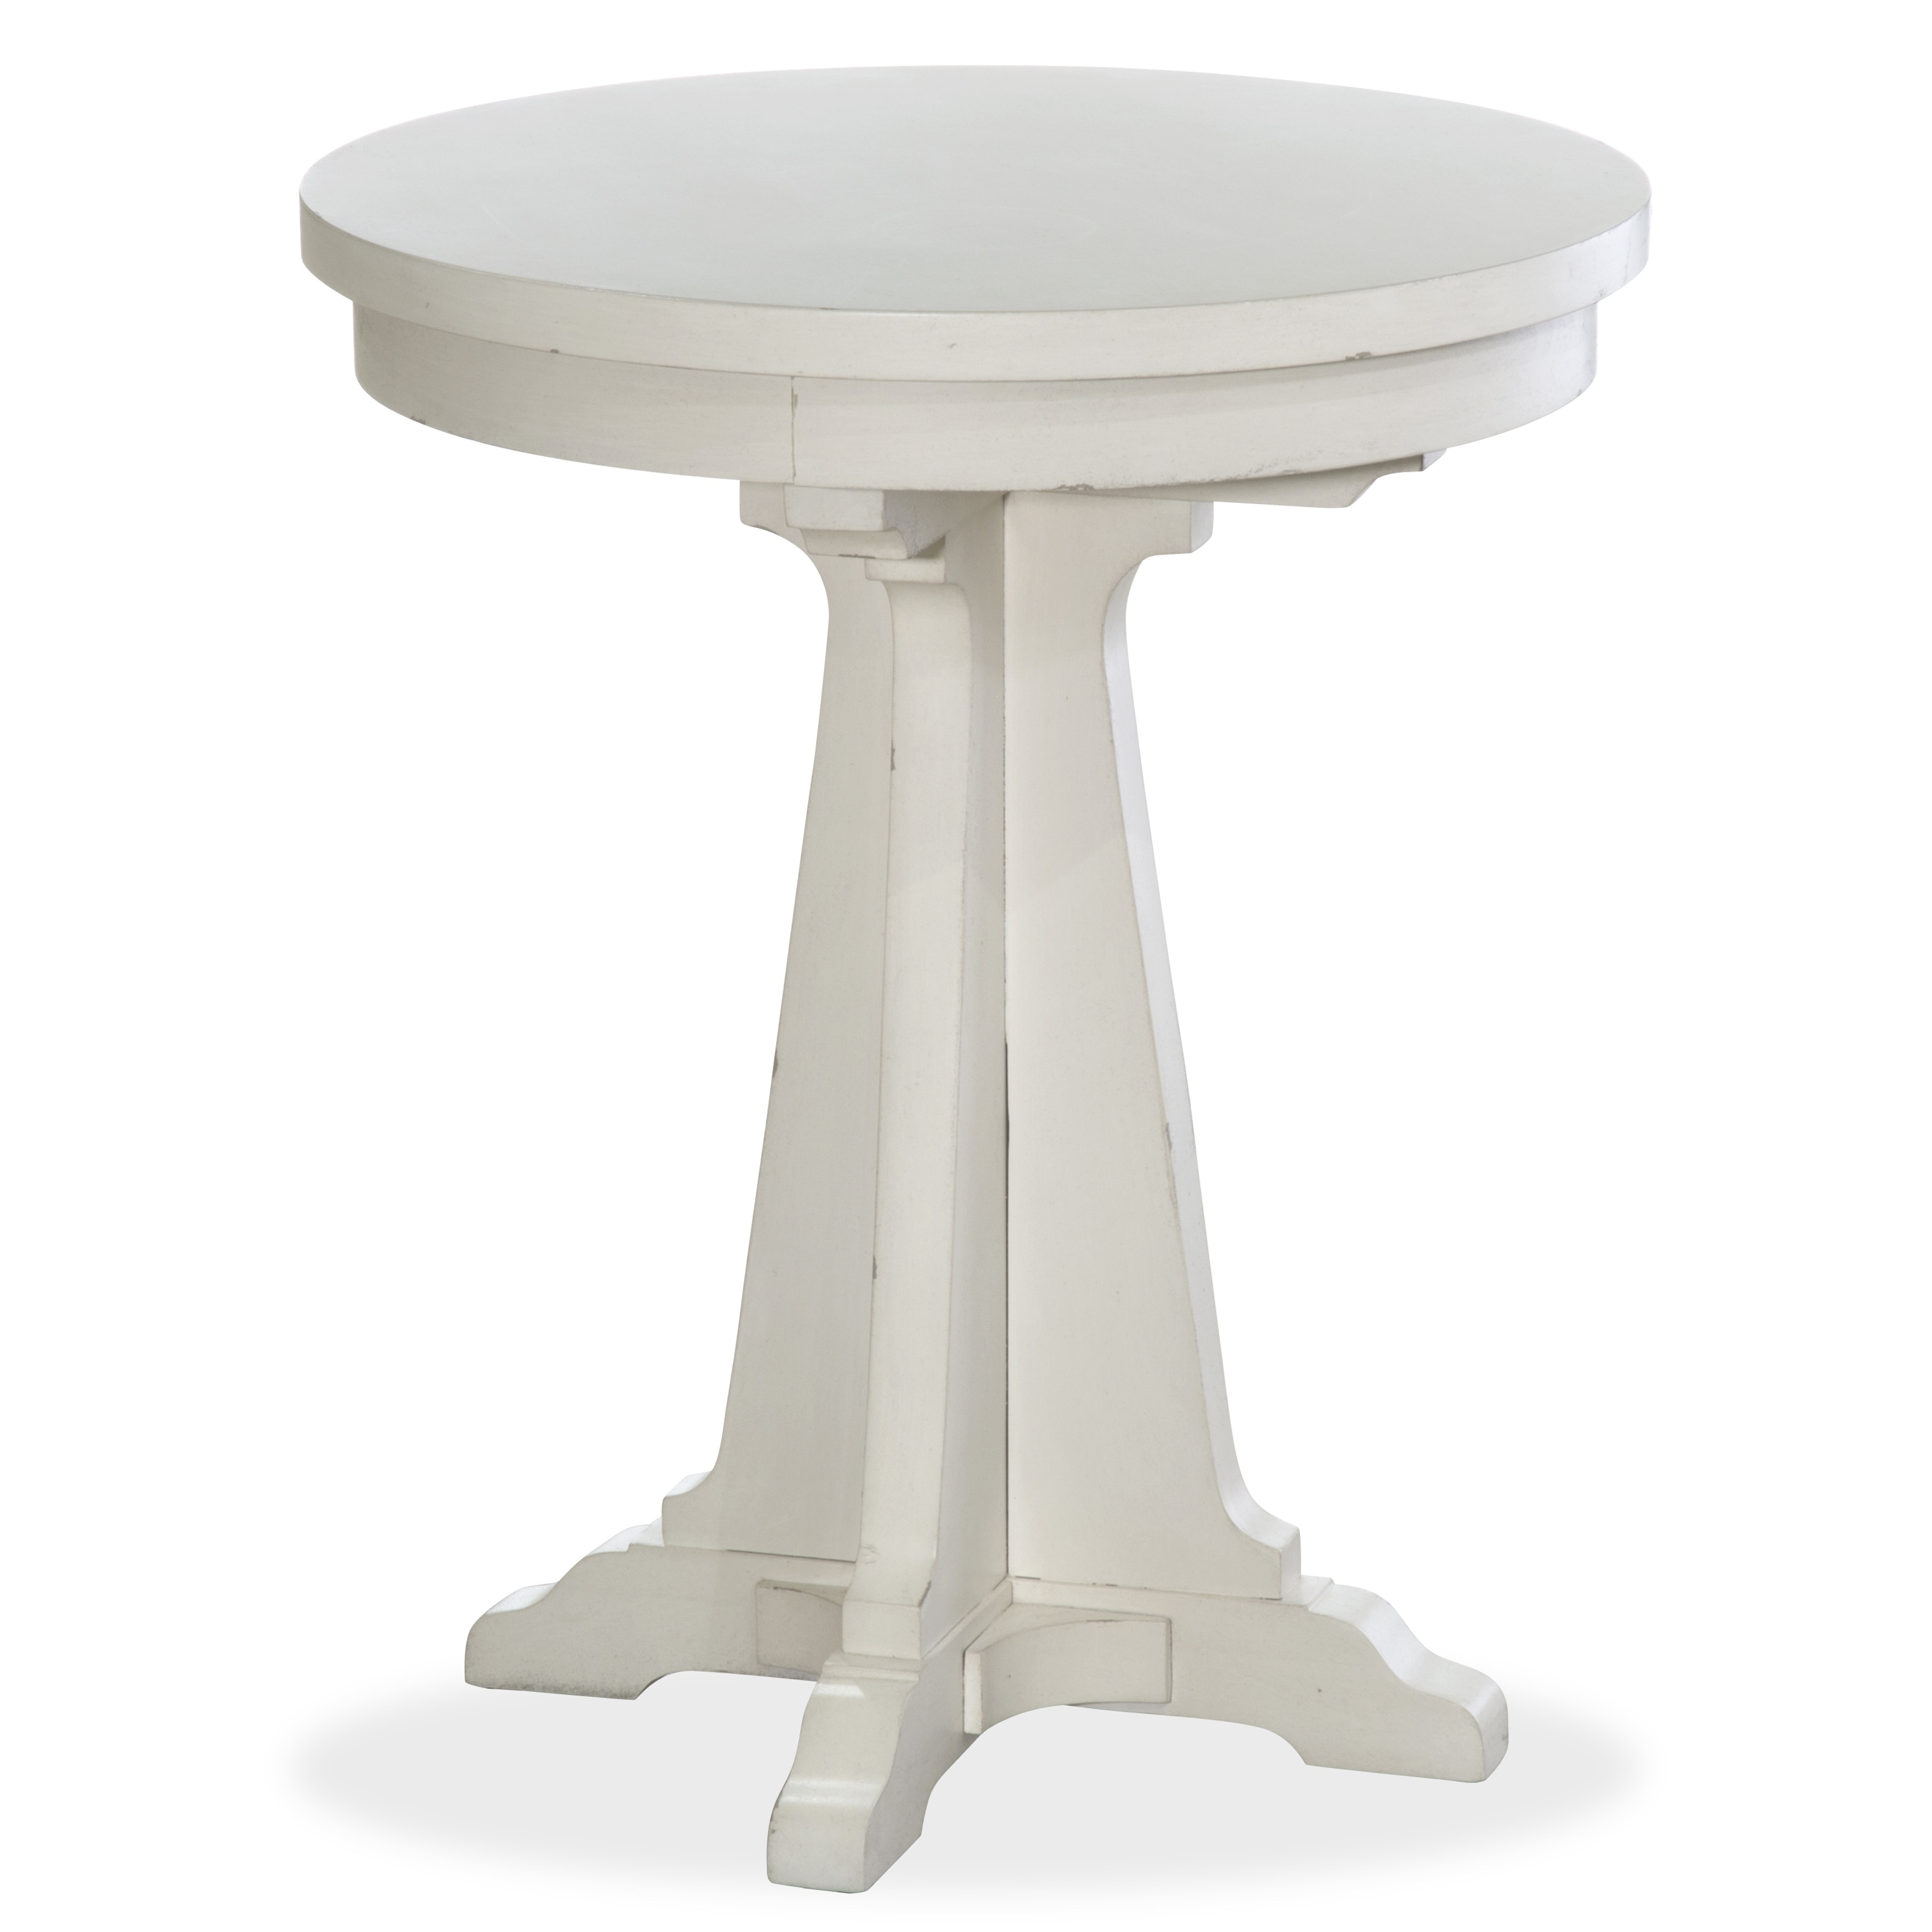 coventry lane farmhouse antique white round accent table free pedestal shipping today with folding sides lawn chairs target apothecary coffee pottery barn contemporary lamps for